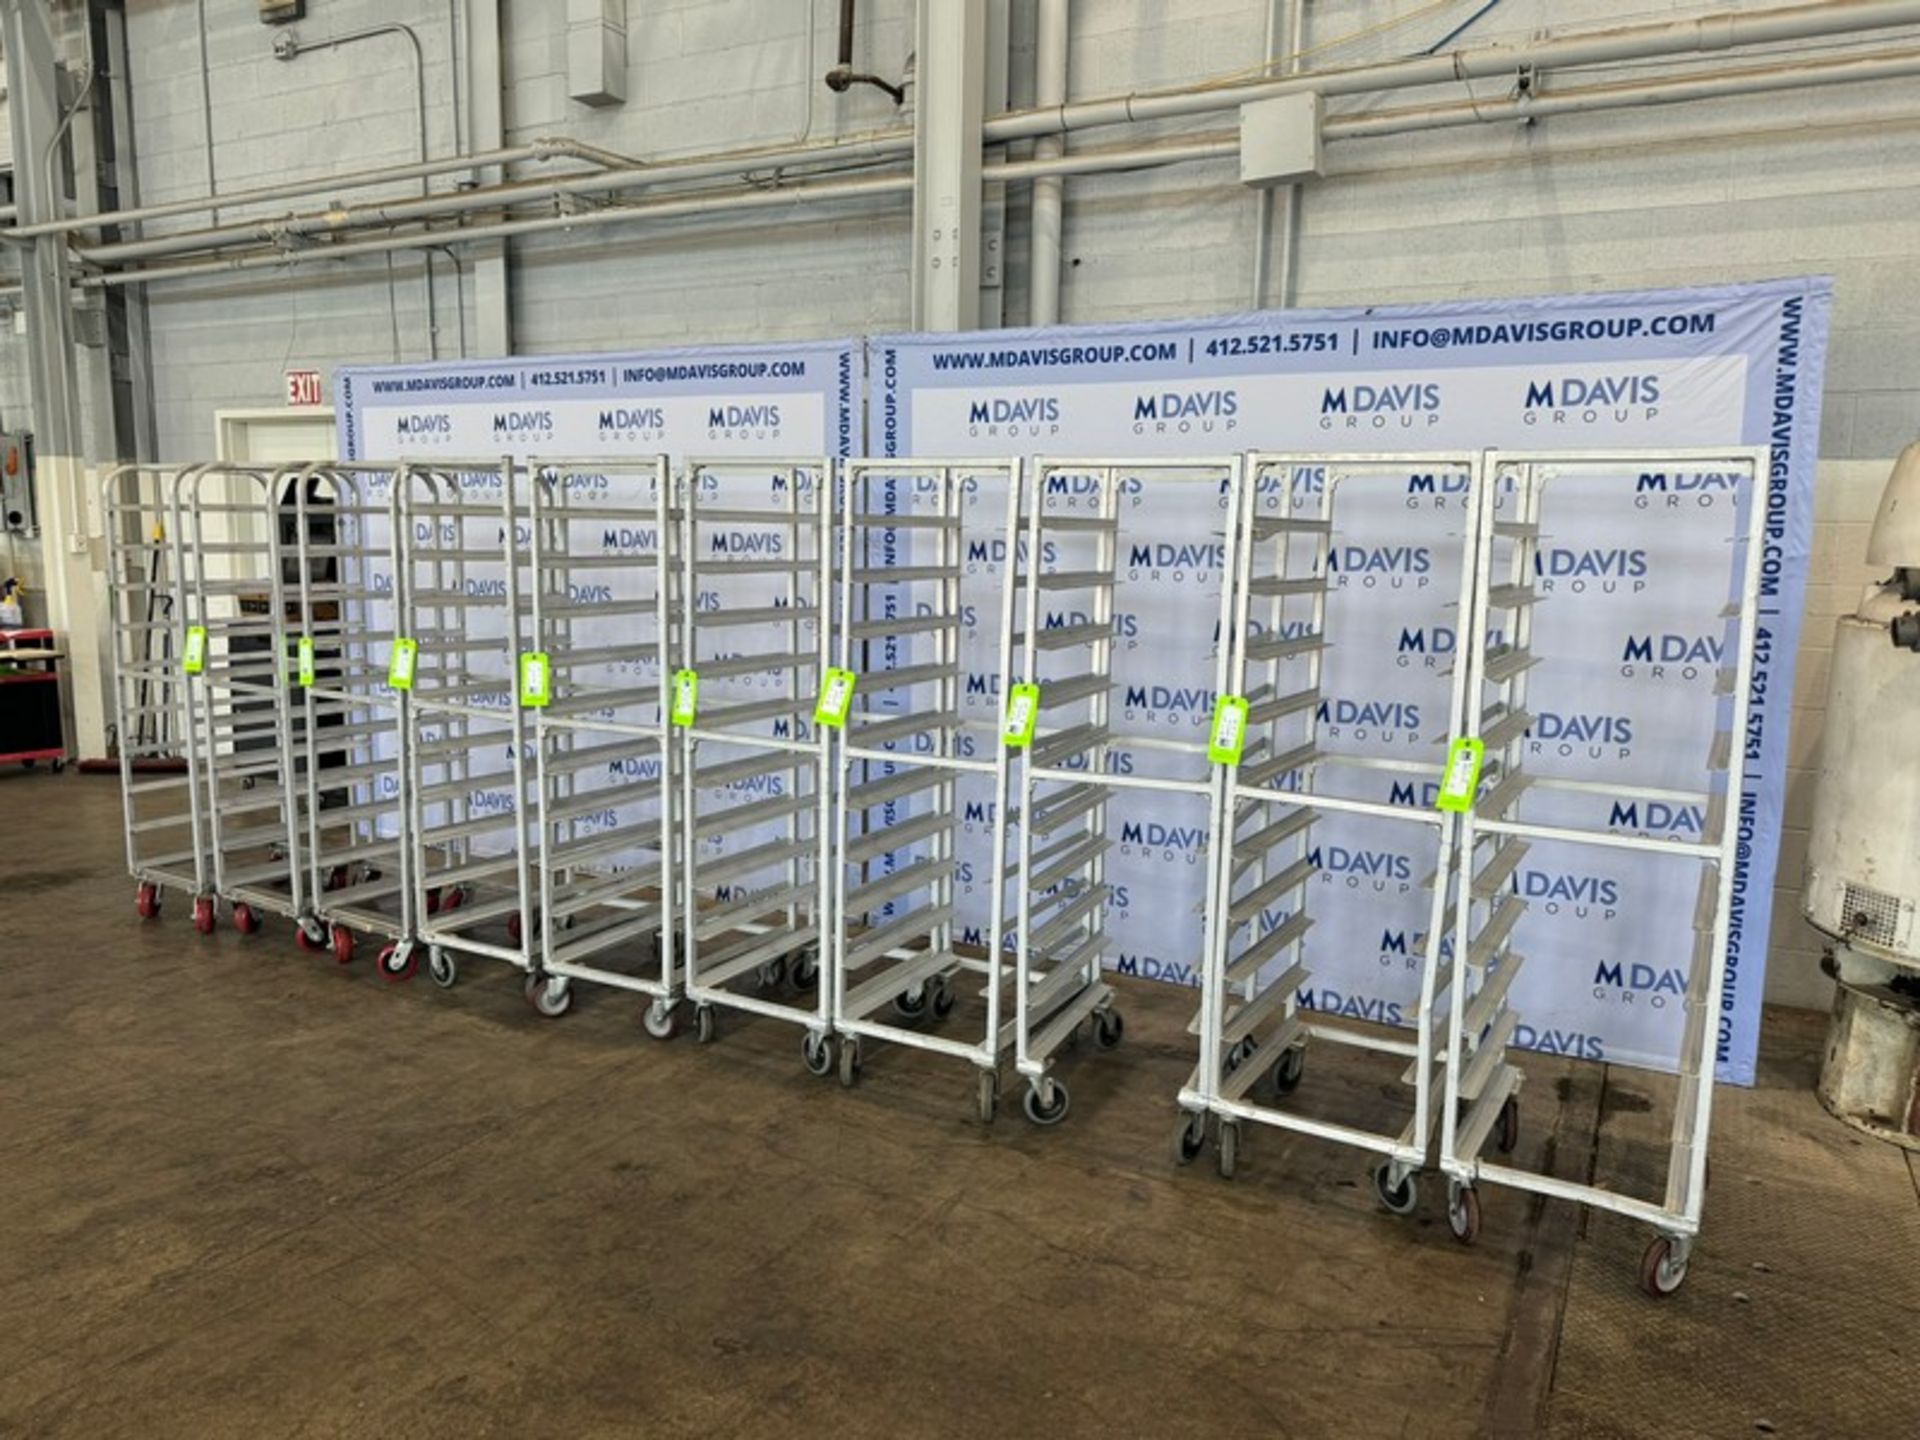 (10) Aluminum Pan Racks, Mounted on Casters (INV#103074) (Located @ the MDG Auction Showroom 2.0 - Image 4 of 7